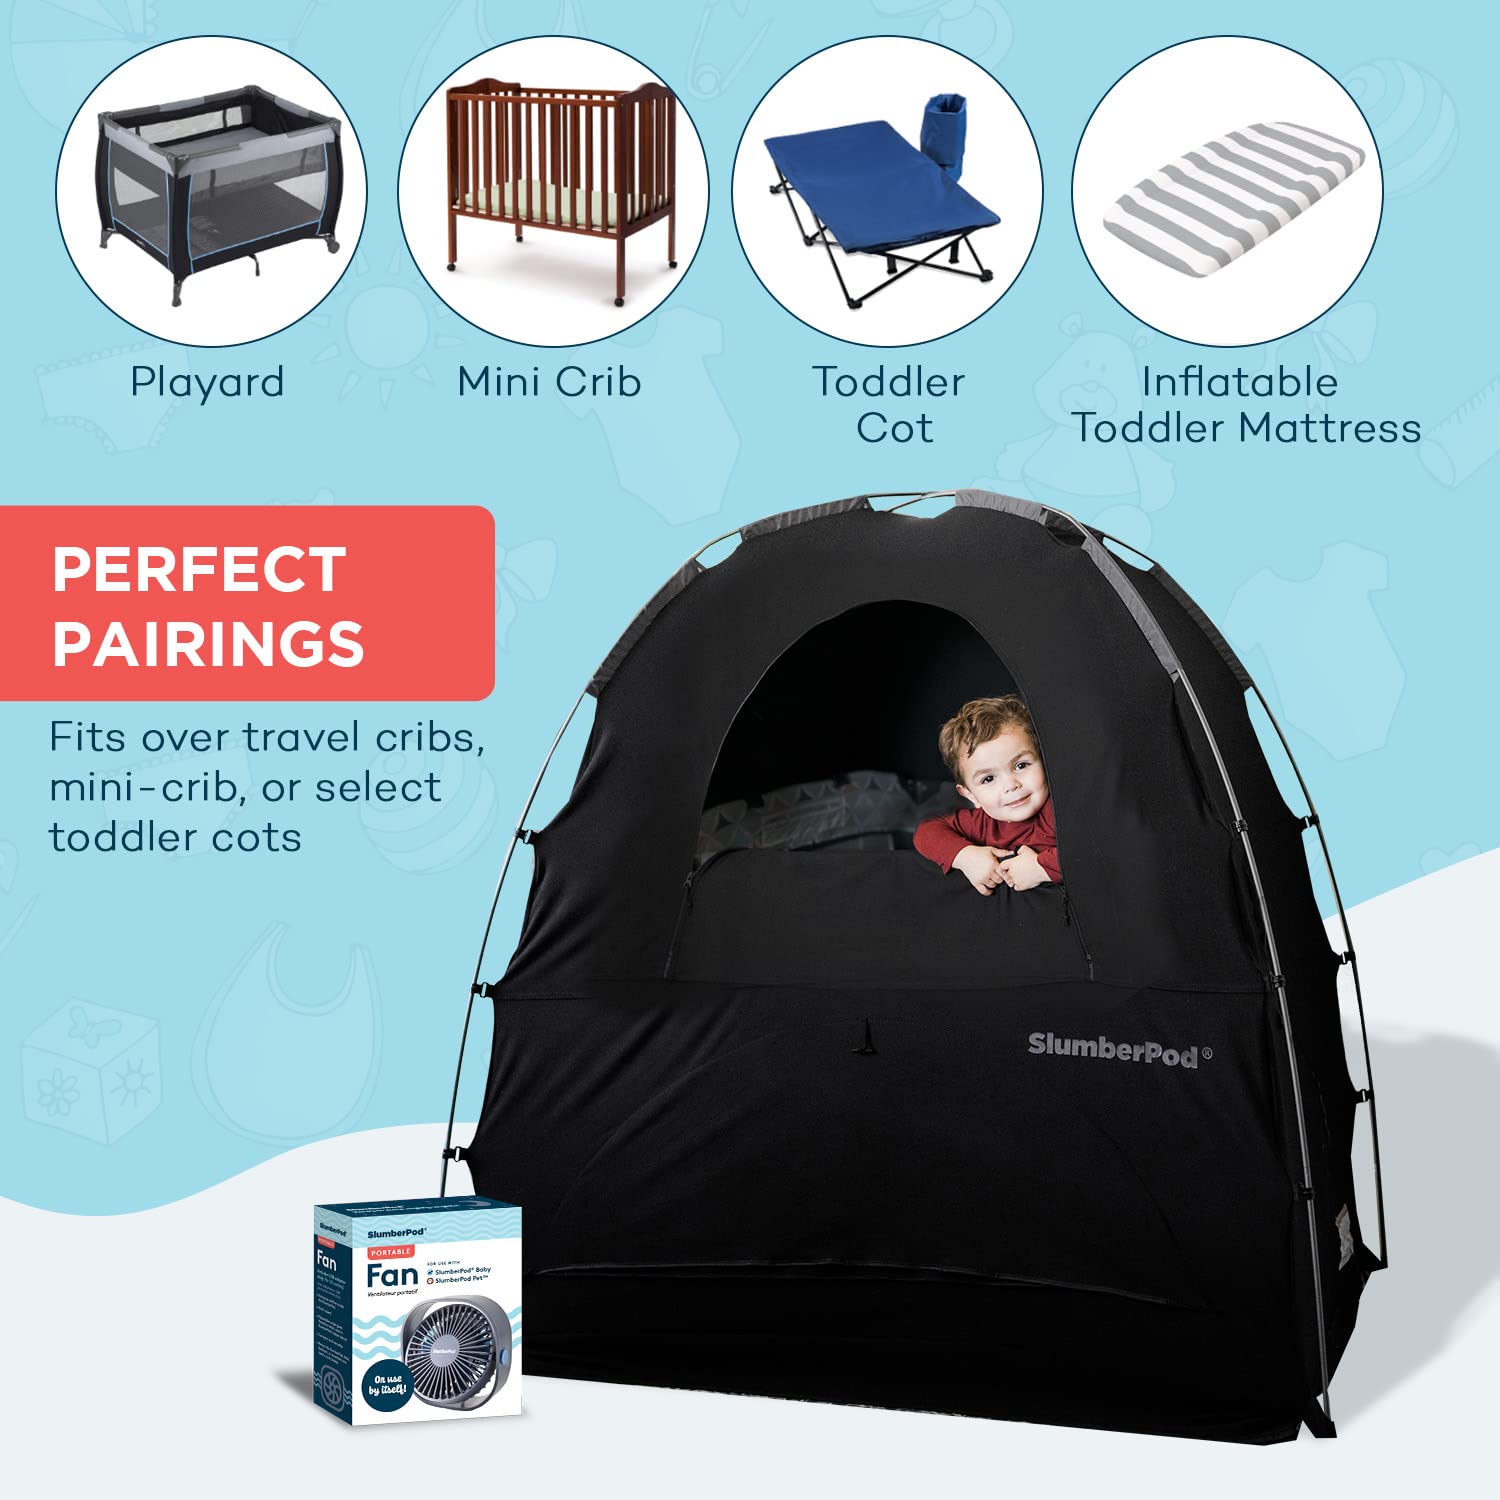 SlumberPod and Fan Combo Portable Privacy Pod Blackout Canopy Crib Cover, Sleeping Space for Age 4 Months and Up, Pack n Play Blackout Cover, Baby Travel Crib Canopy (Black/Grey)